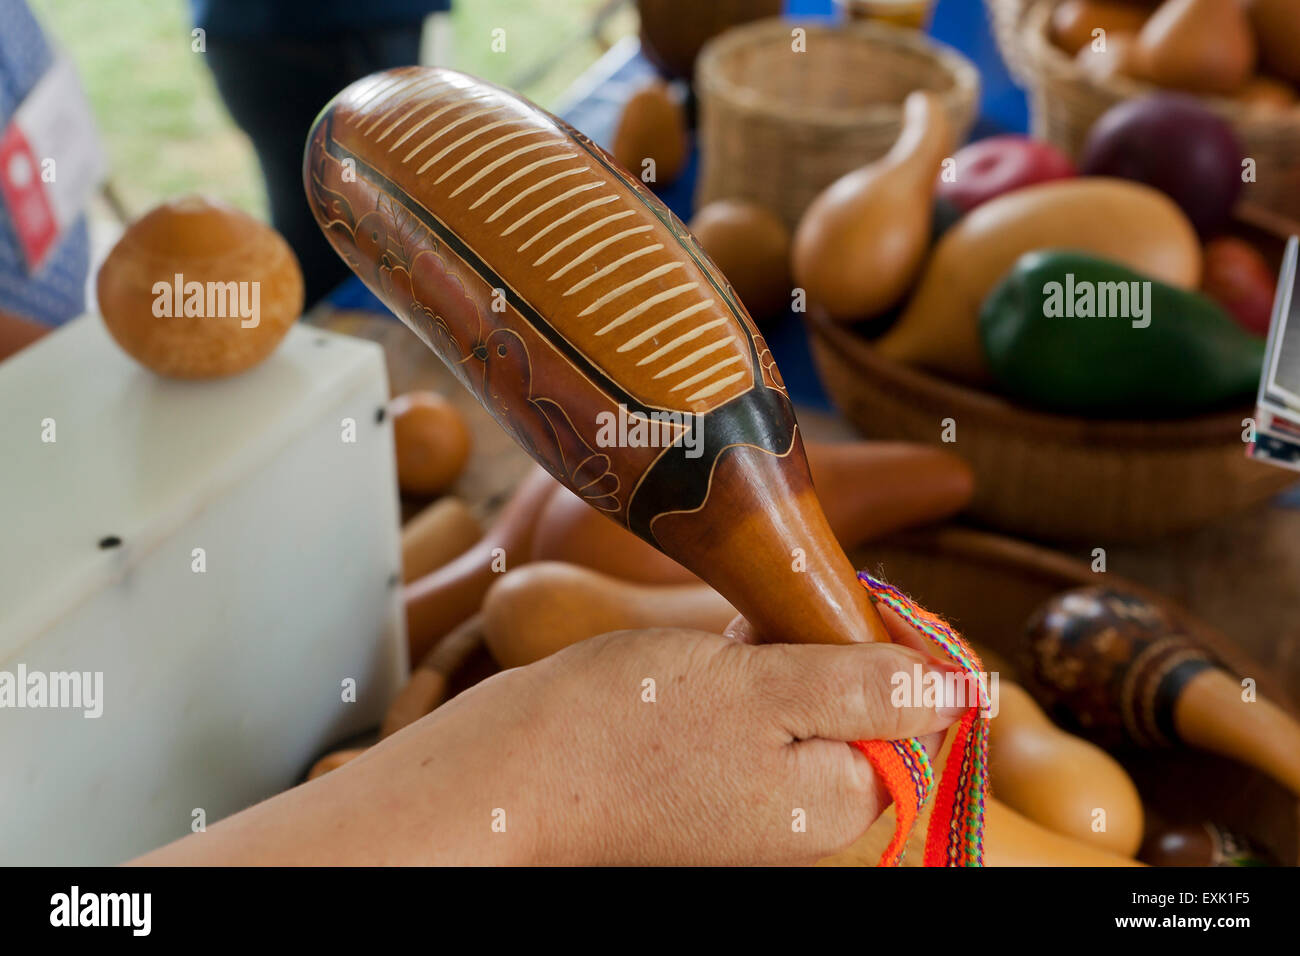 Guiro, Latin American percussion instrument made from a gourd Stock Photo